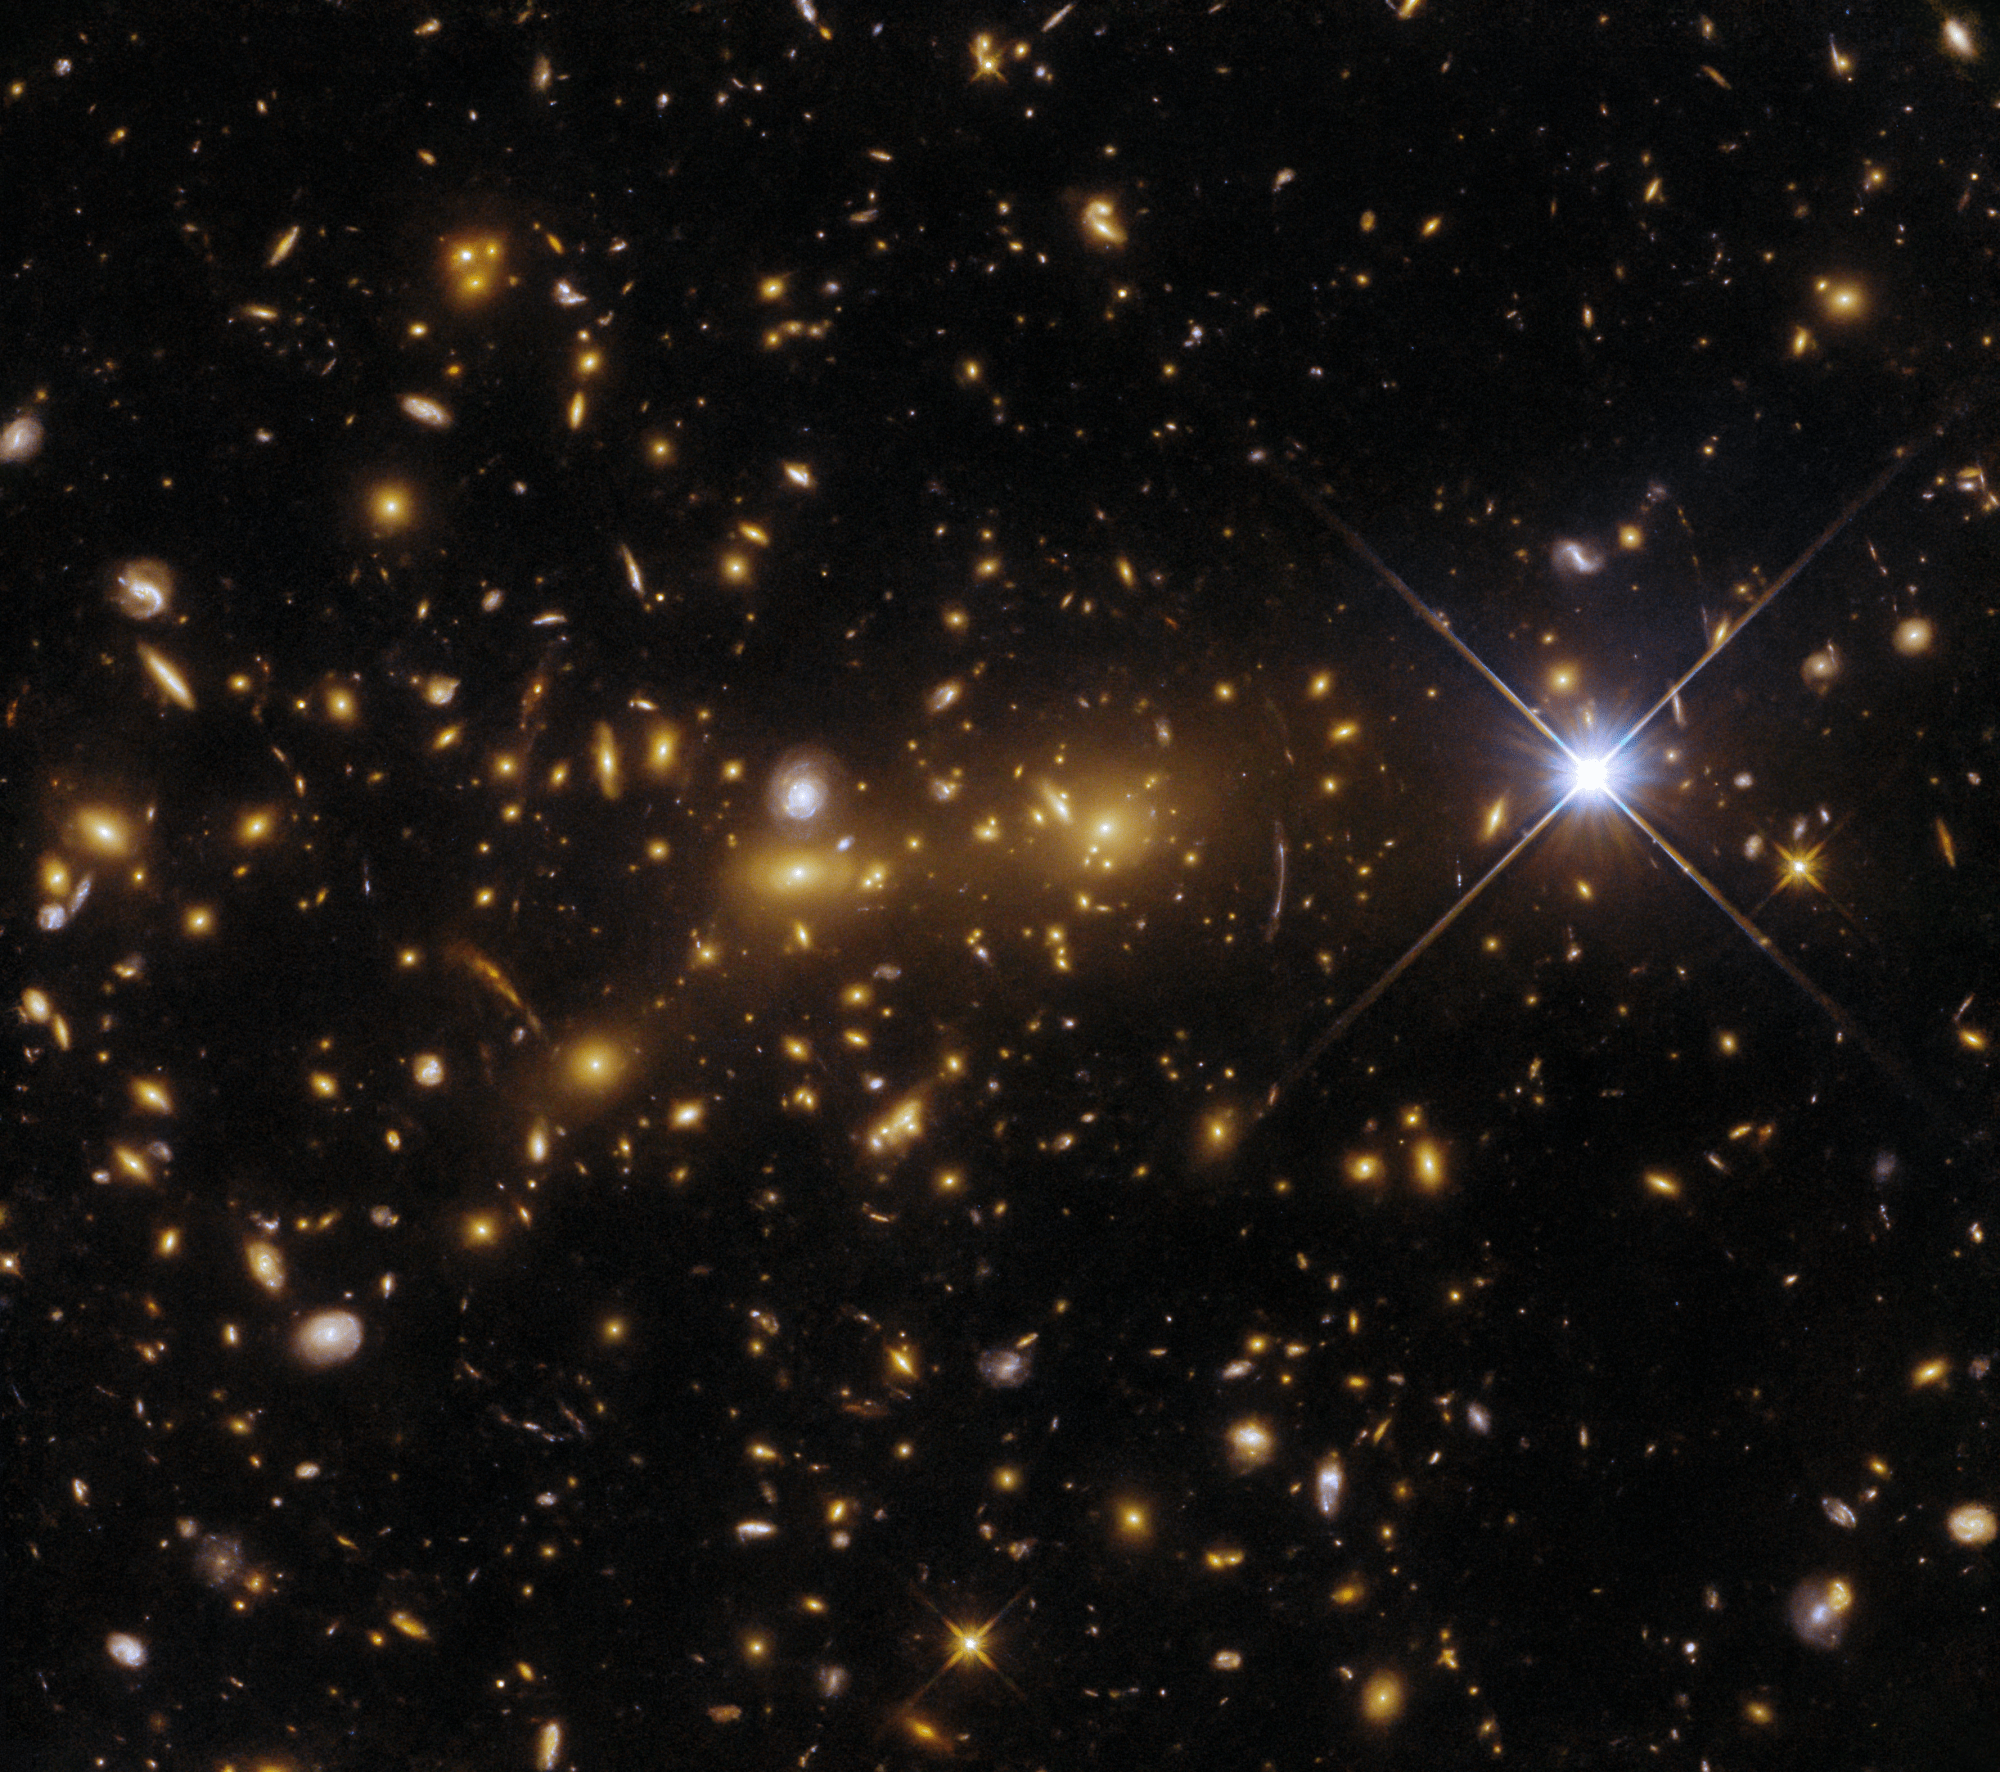 A cluster of elliptical galaxies, visible as a dense crowd of oval shapes, each glowing orange around a bright core. Various other galaxies are dotted all around, a few being small spirals. A bright star with four long spikes stands out at the right.